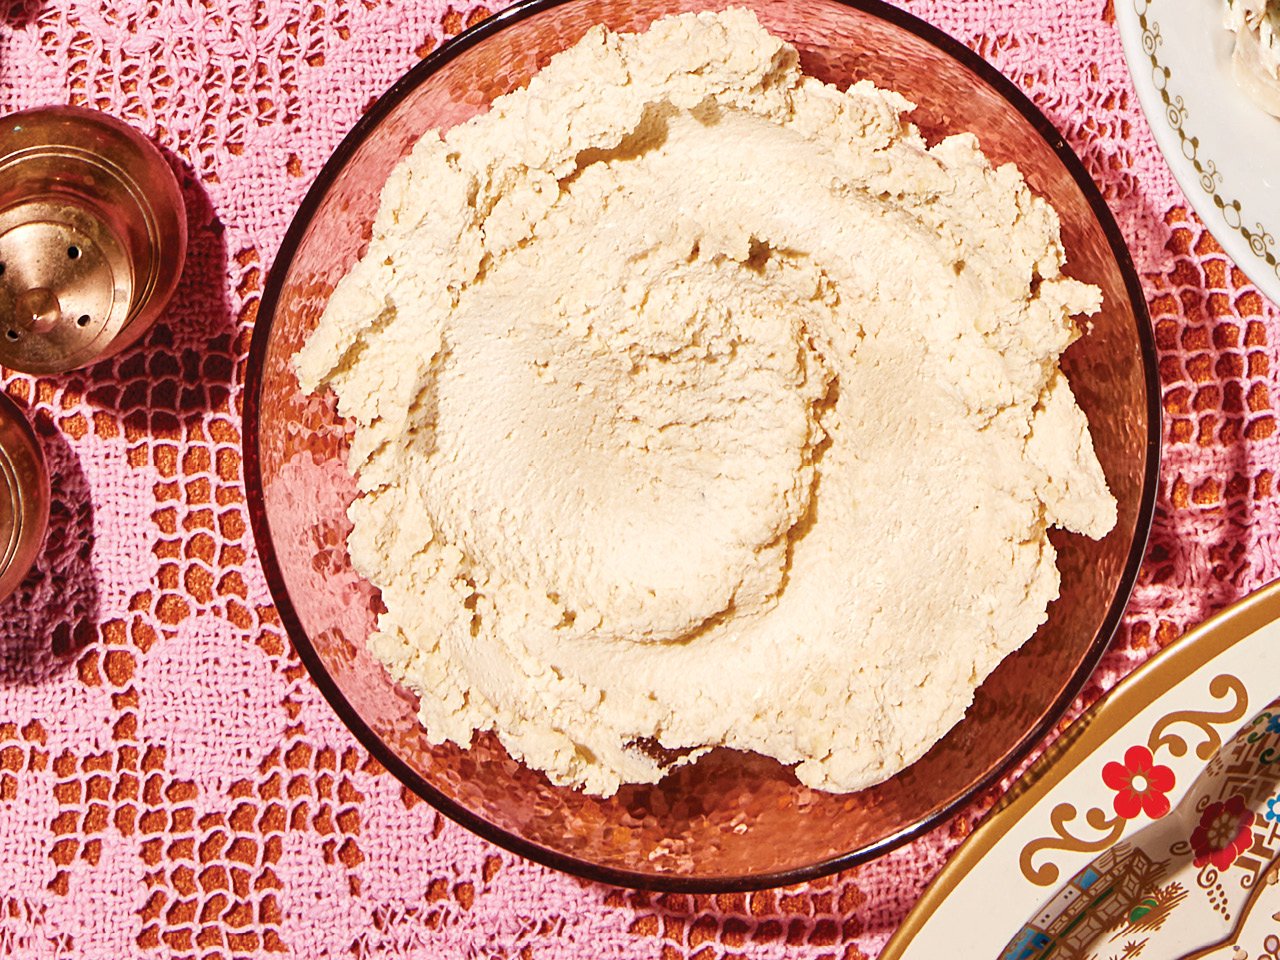 A bowl of cashew "cream cheese" served atop a pink lace tablecloth